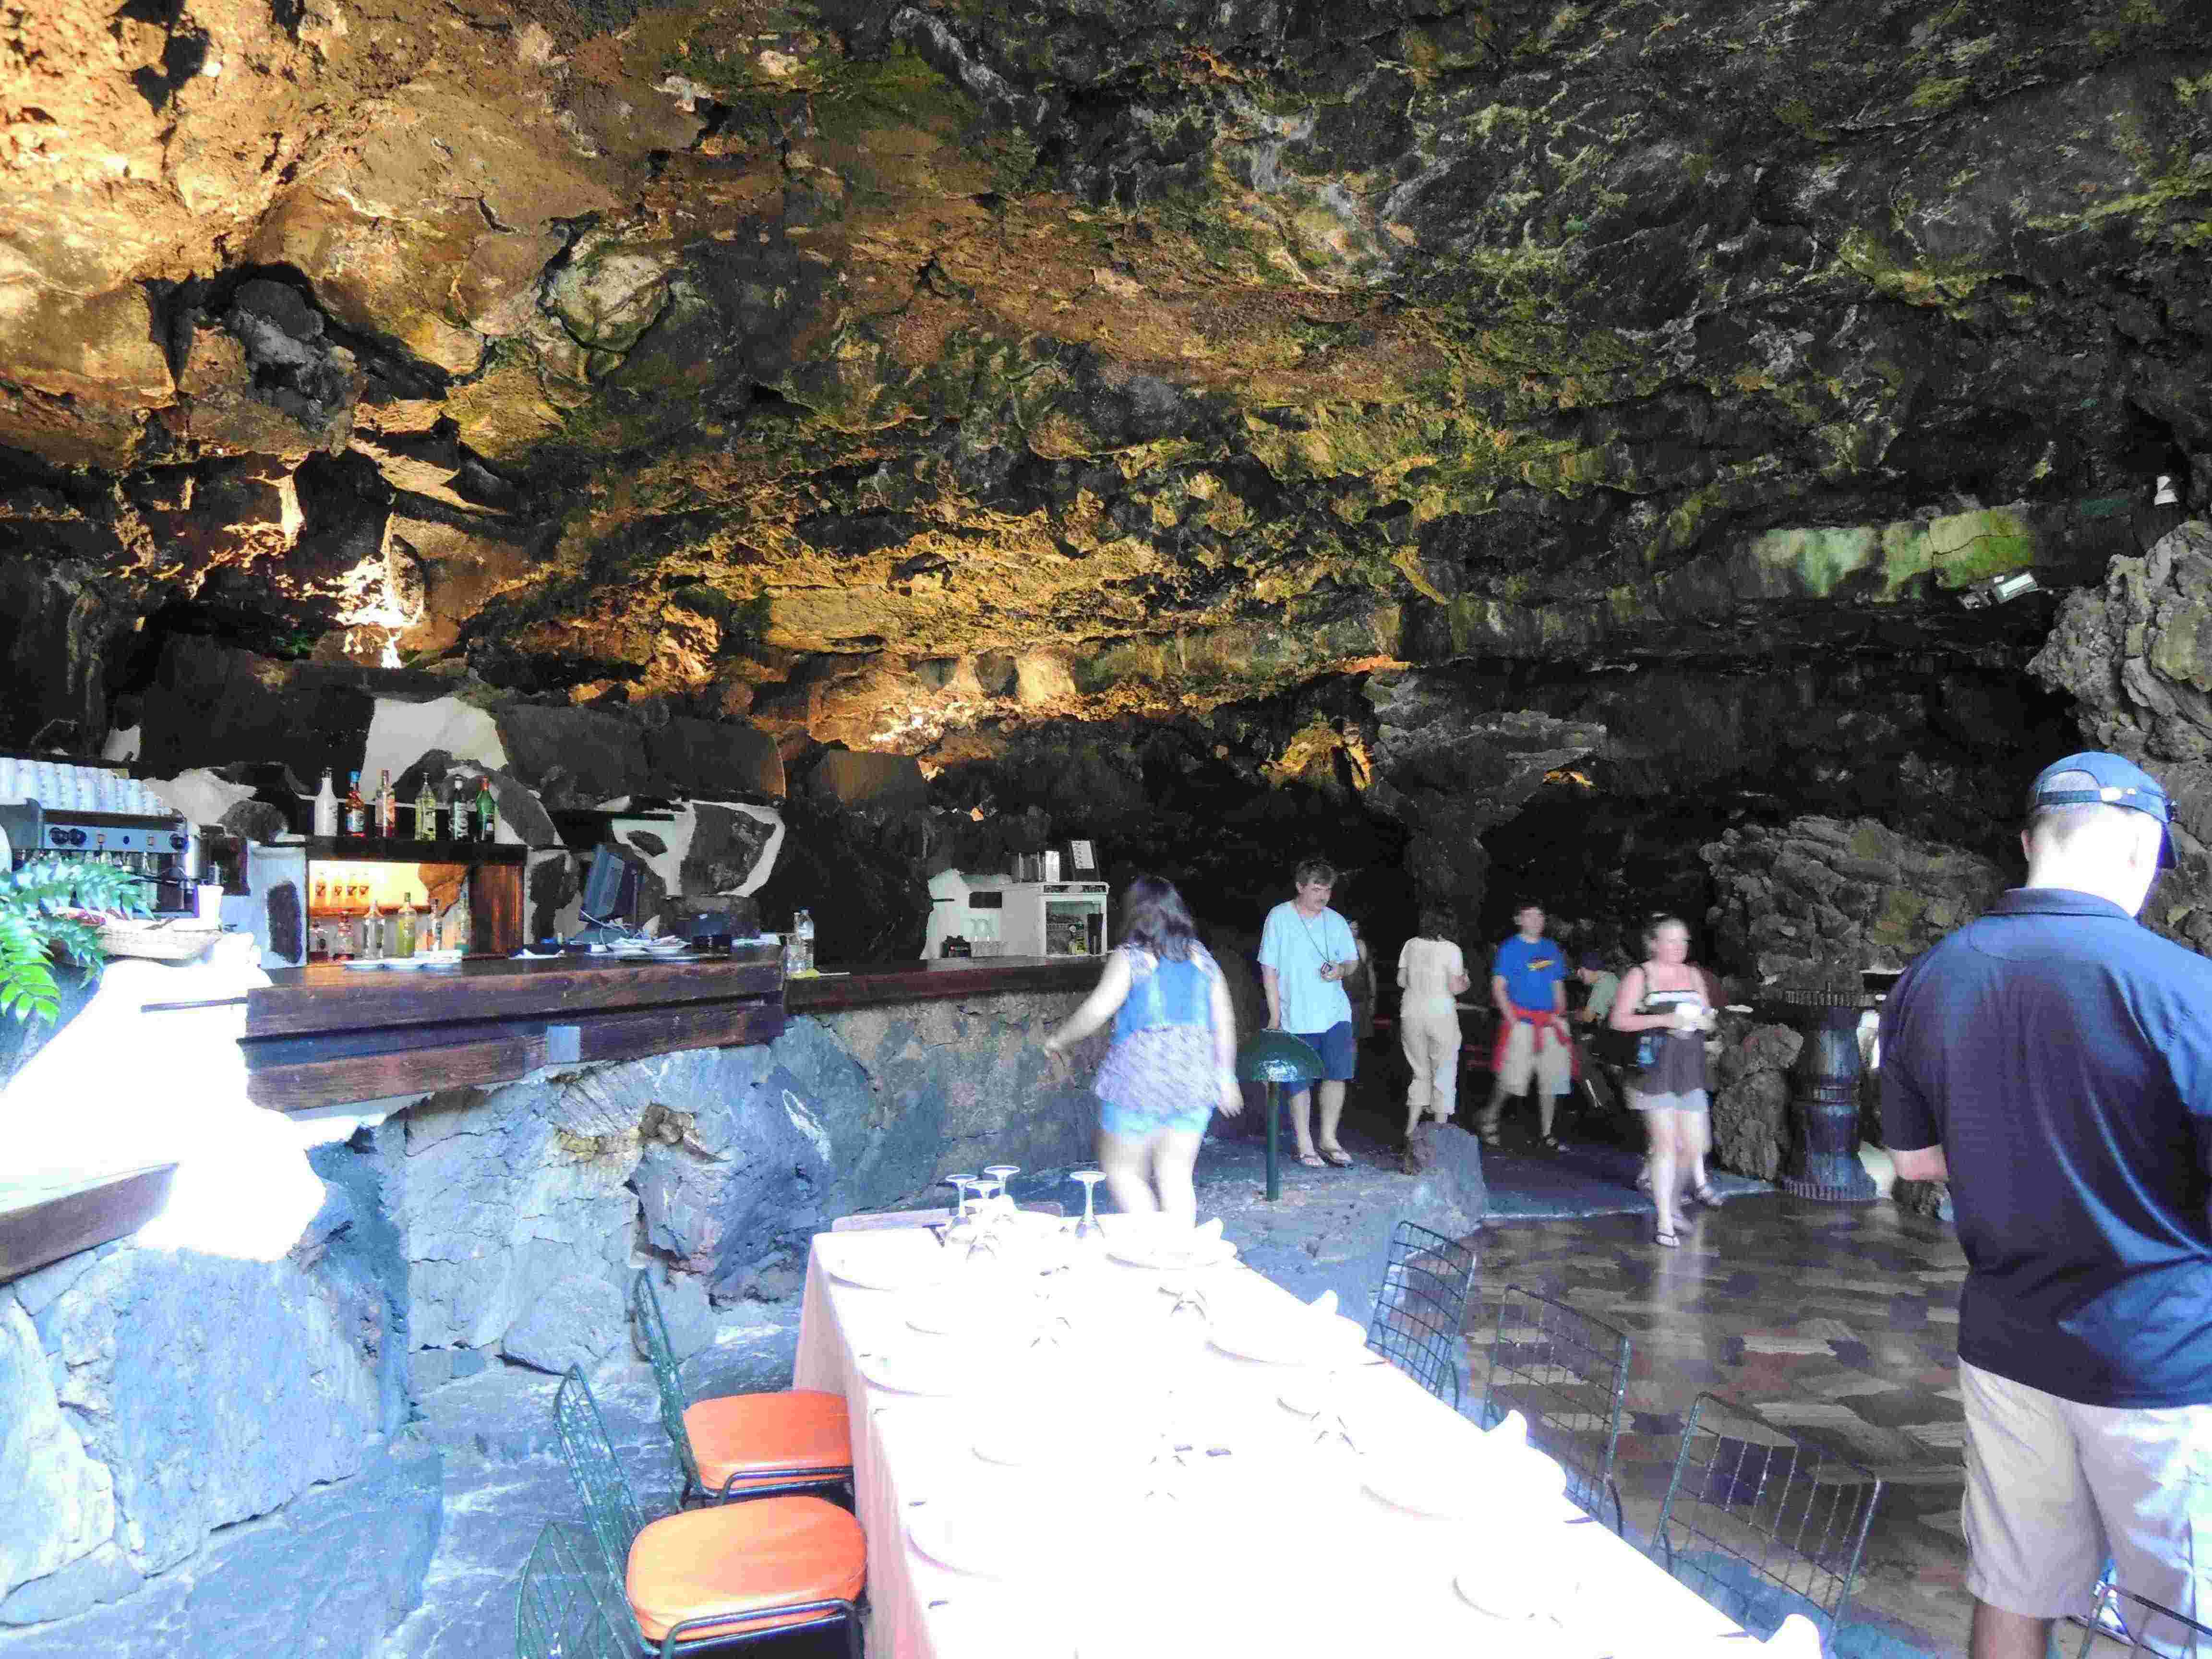 Another lava-tube cave serves as a restaurant